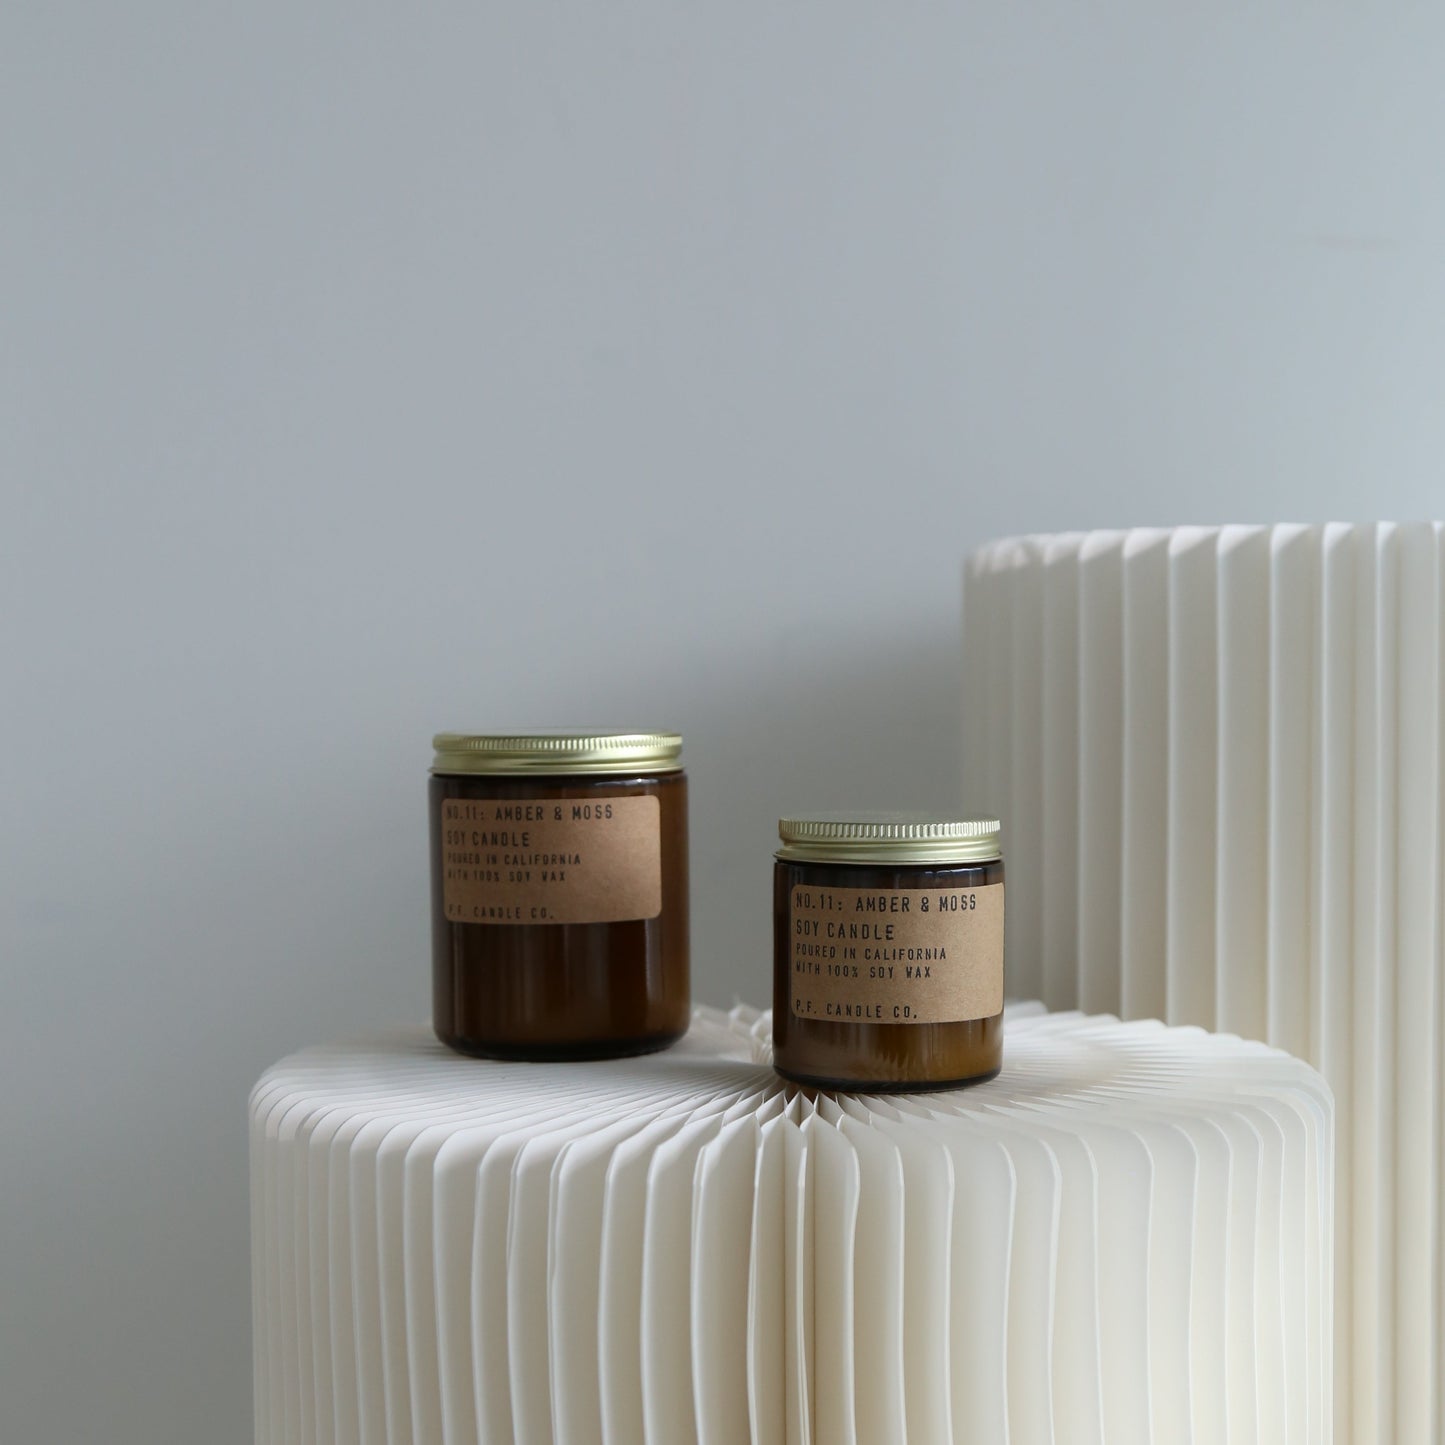 P.F. Candle Co mini amber and moss candle available at Rook & Rose.